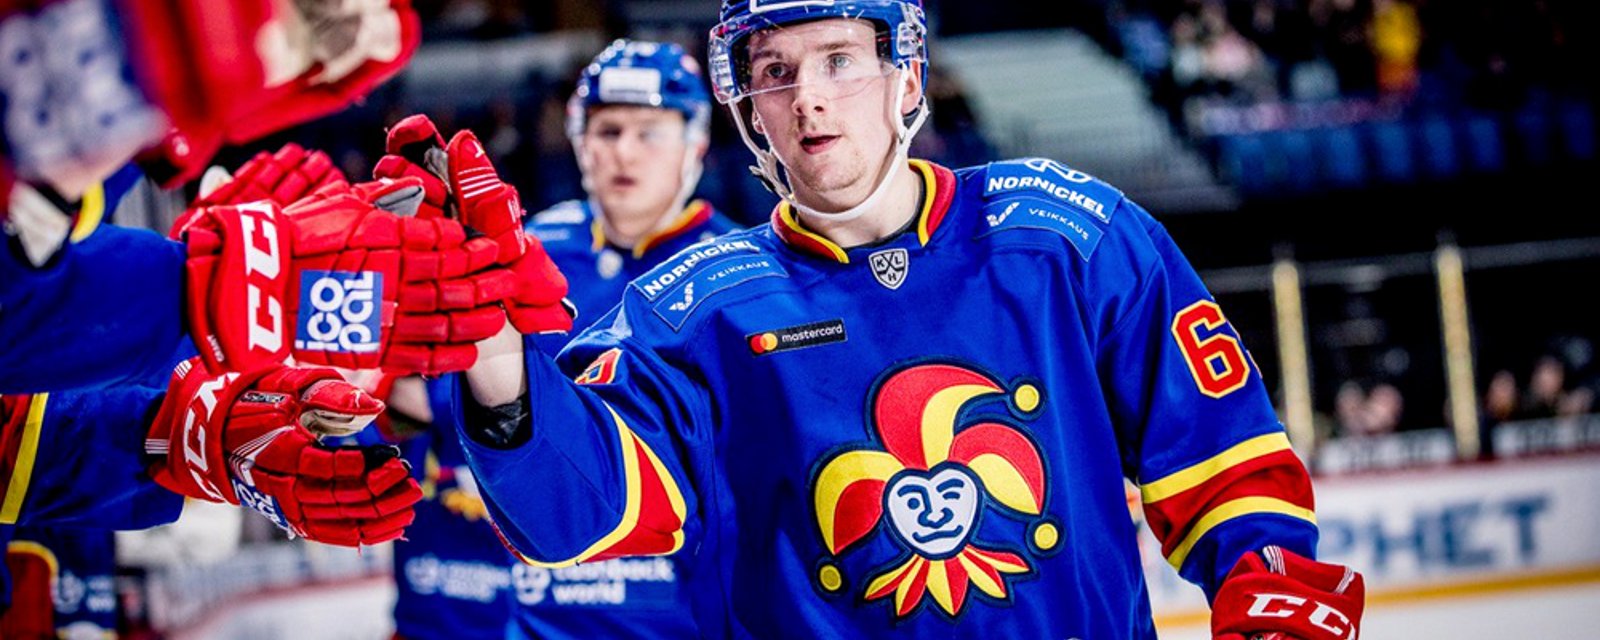 KHL team Jokerit forfeits game after refusing to show up over human rights issues